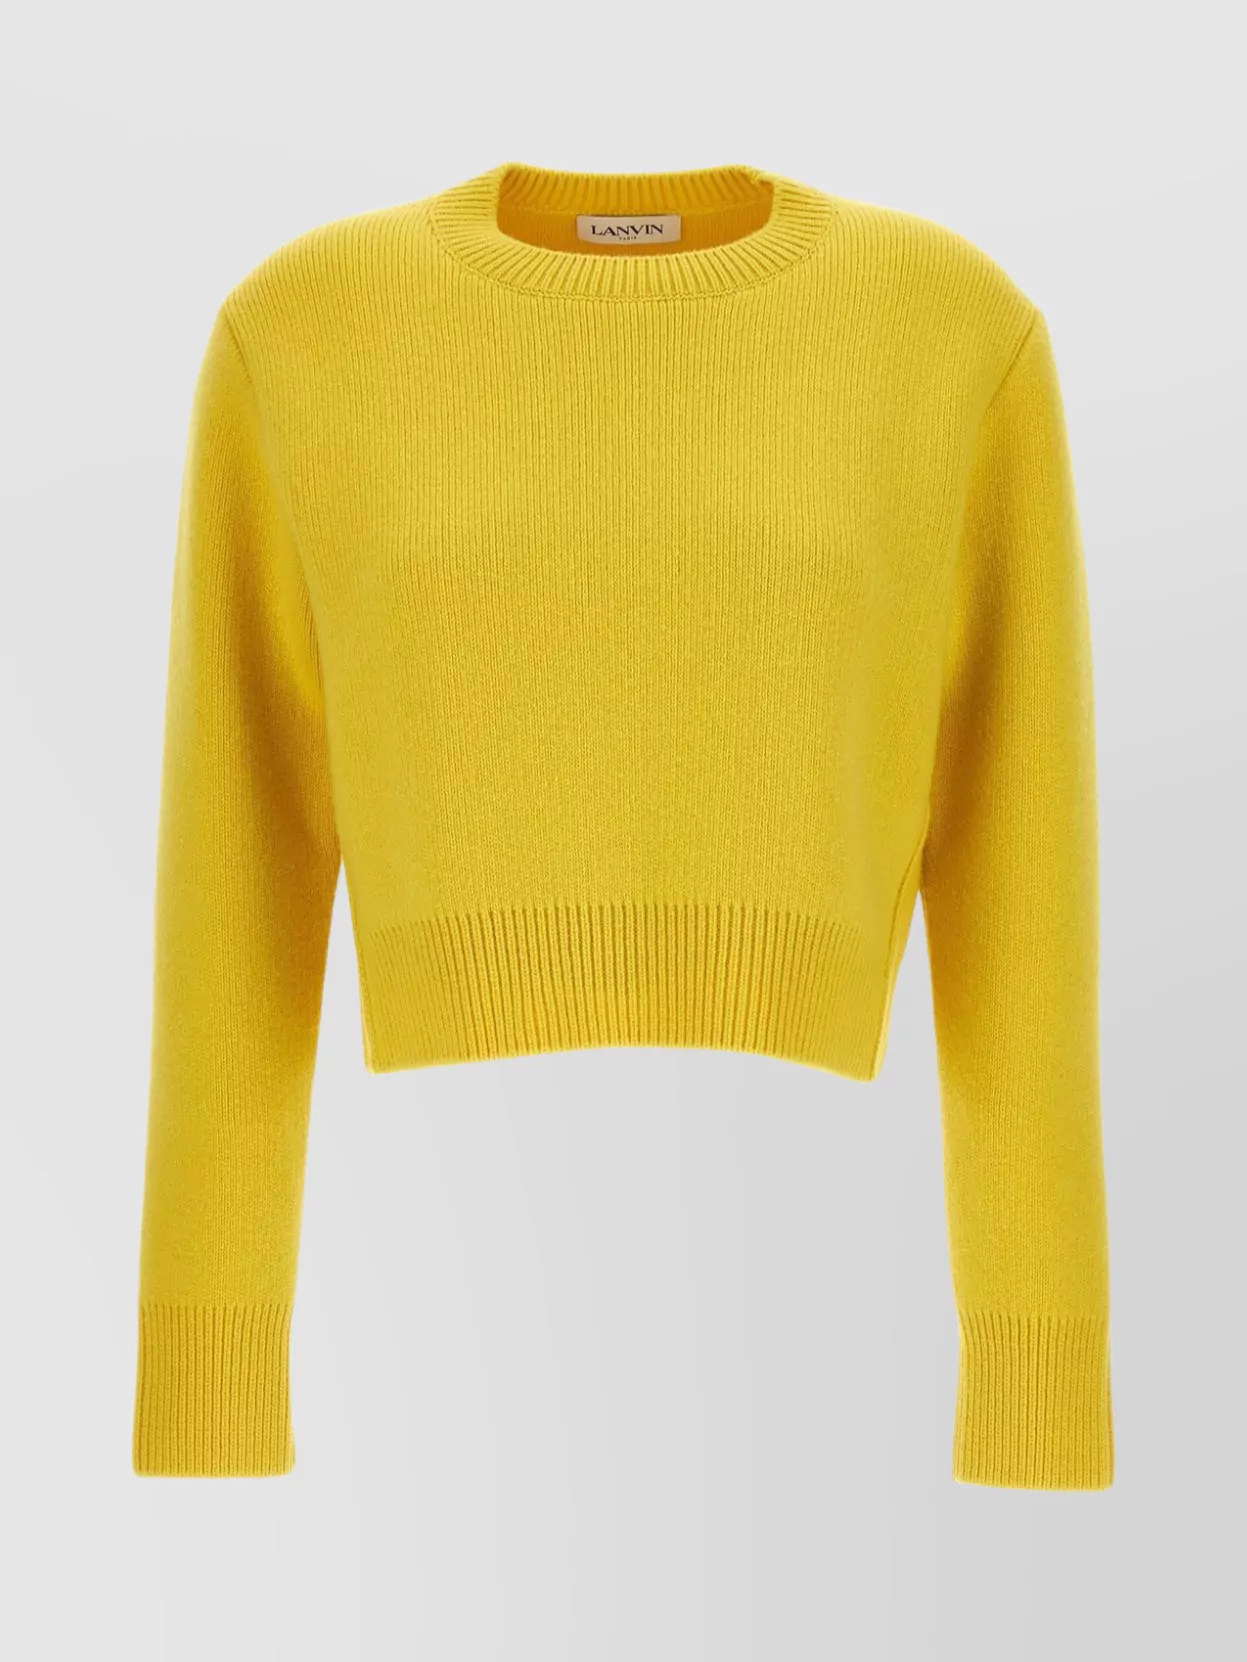 Lanvin Crew Neck Cashmere Wool Cropped Sweater